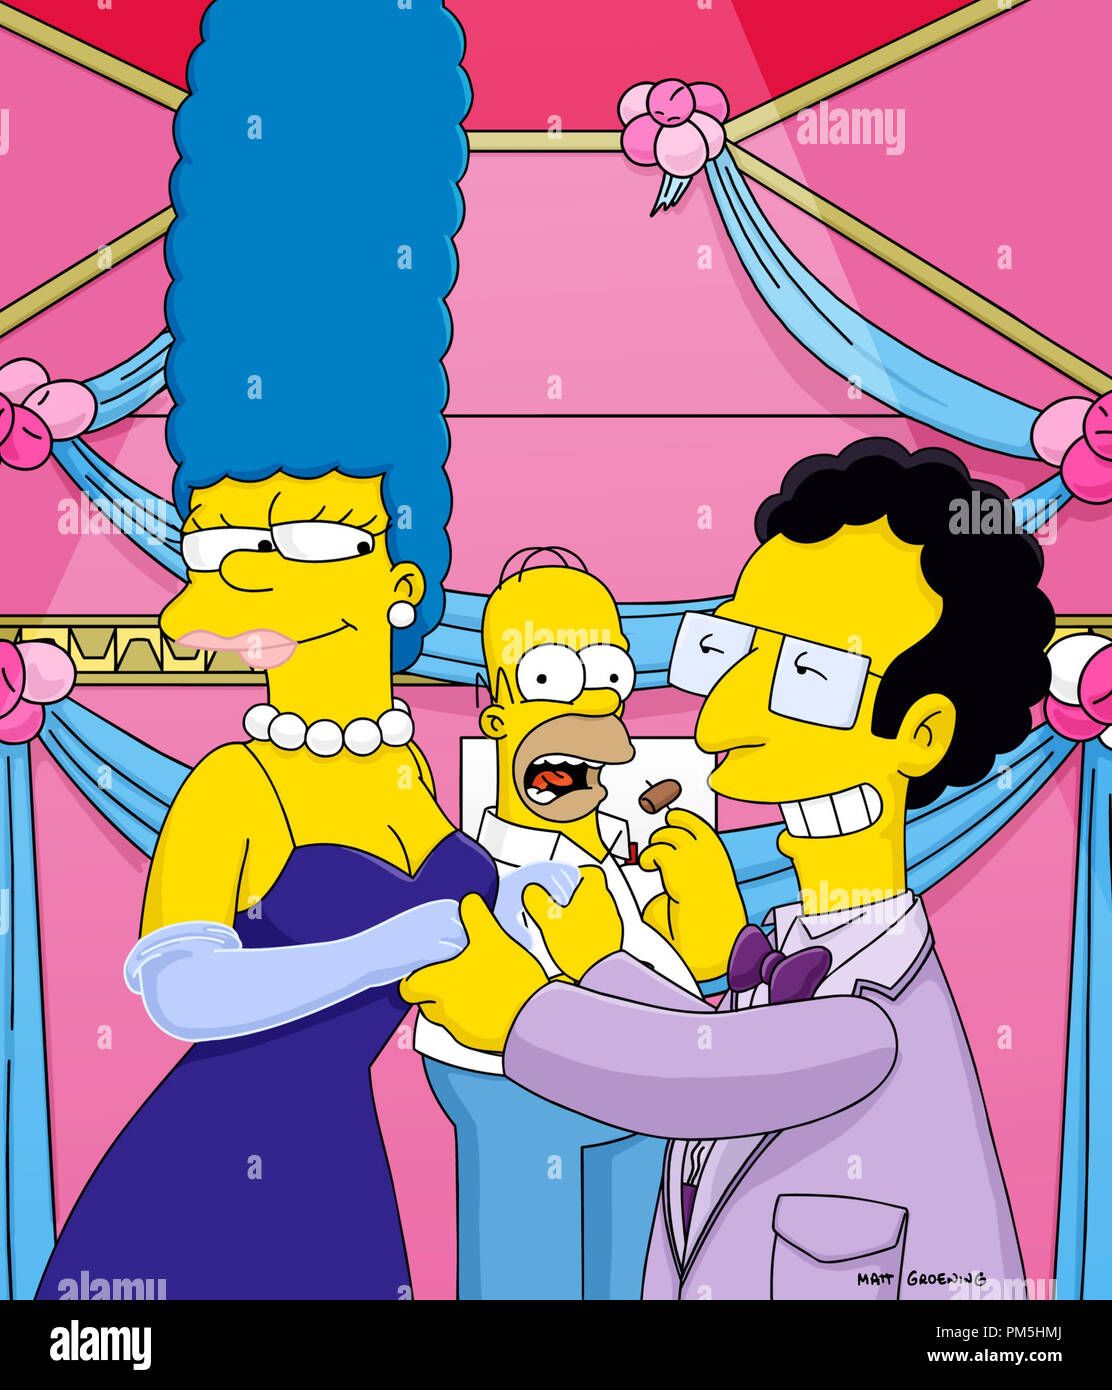 Film Still / Publicity Still from 'The Simpsons' Episode: 'Half-Decent Proposal' Marge Simpson, Homer Simpson, Artie Ziff February 10, 2002 File Reference # 30754261THA  For Editorial Use Only -  All Rights Reserved Stock Photo